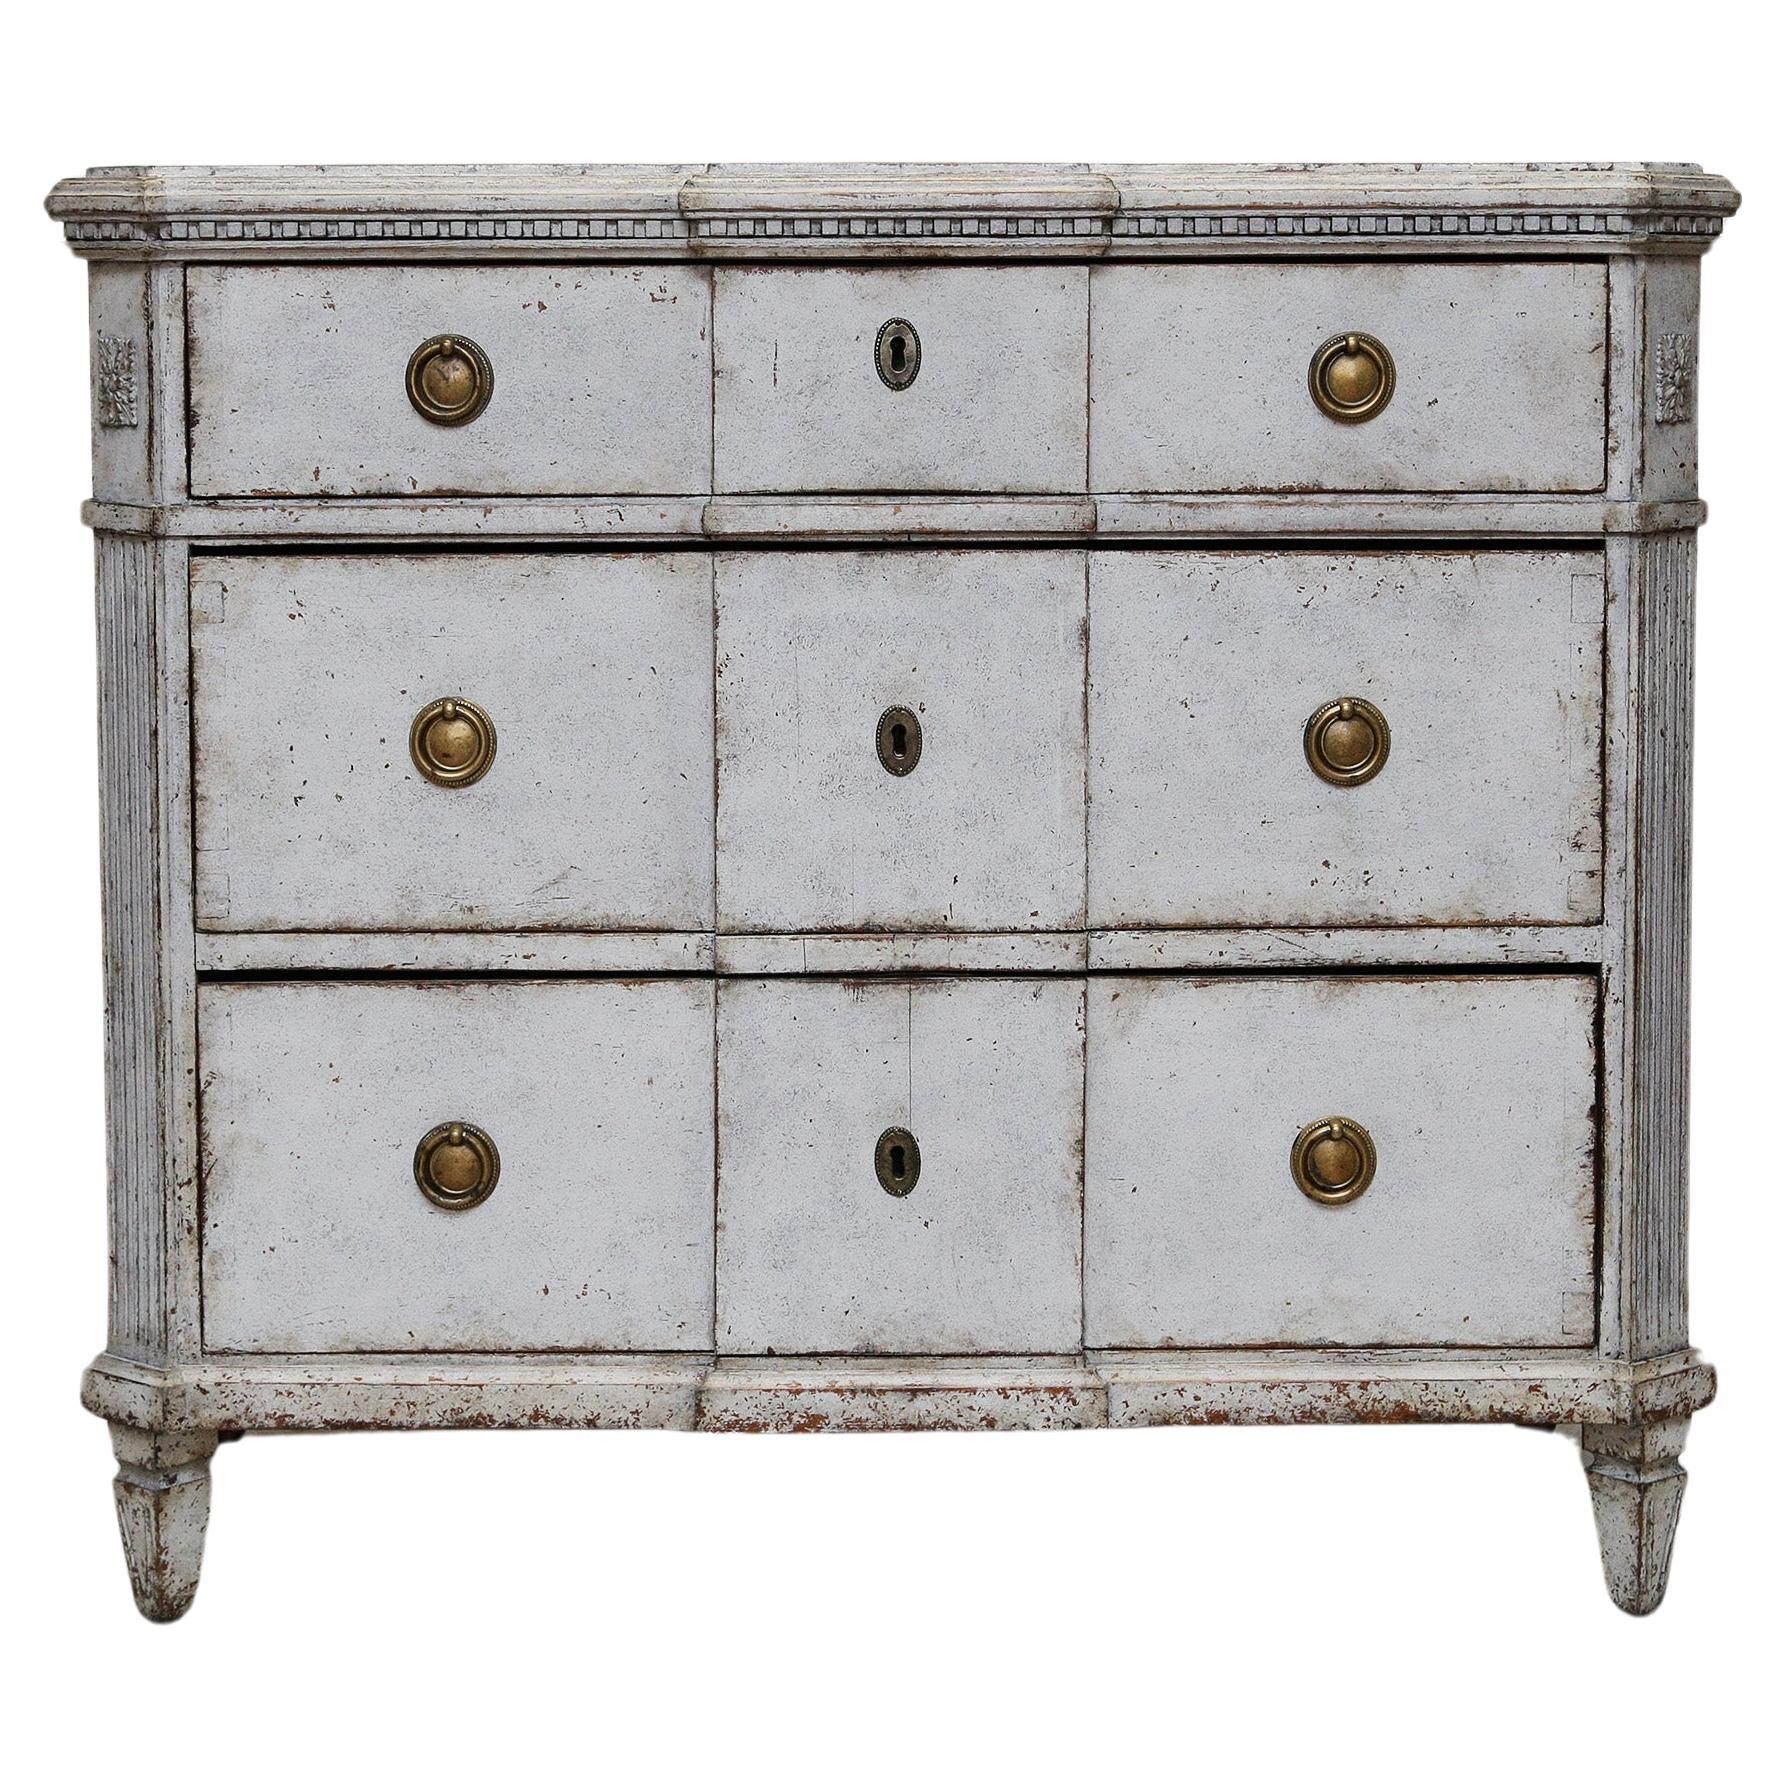 Swedish Gustavian Painted Chest of Drawers Commode Grey White C.1860 